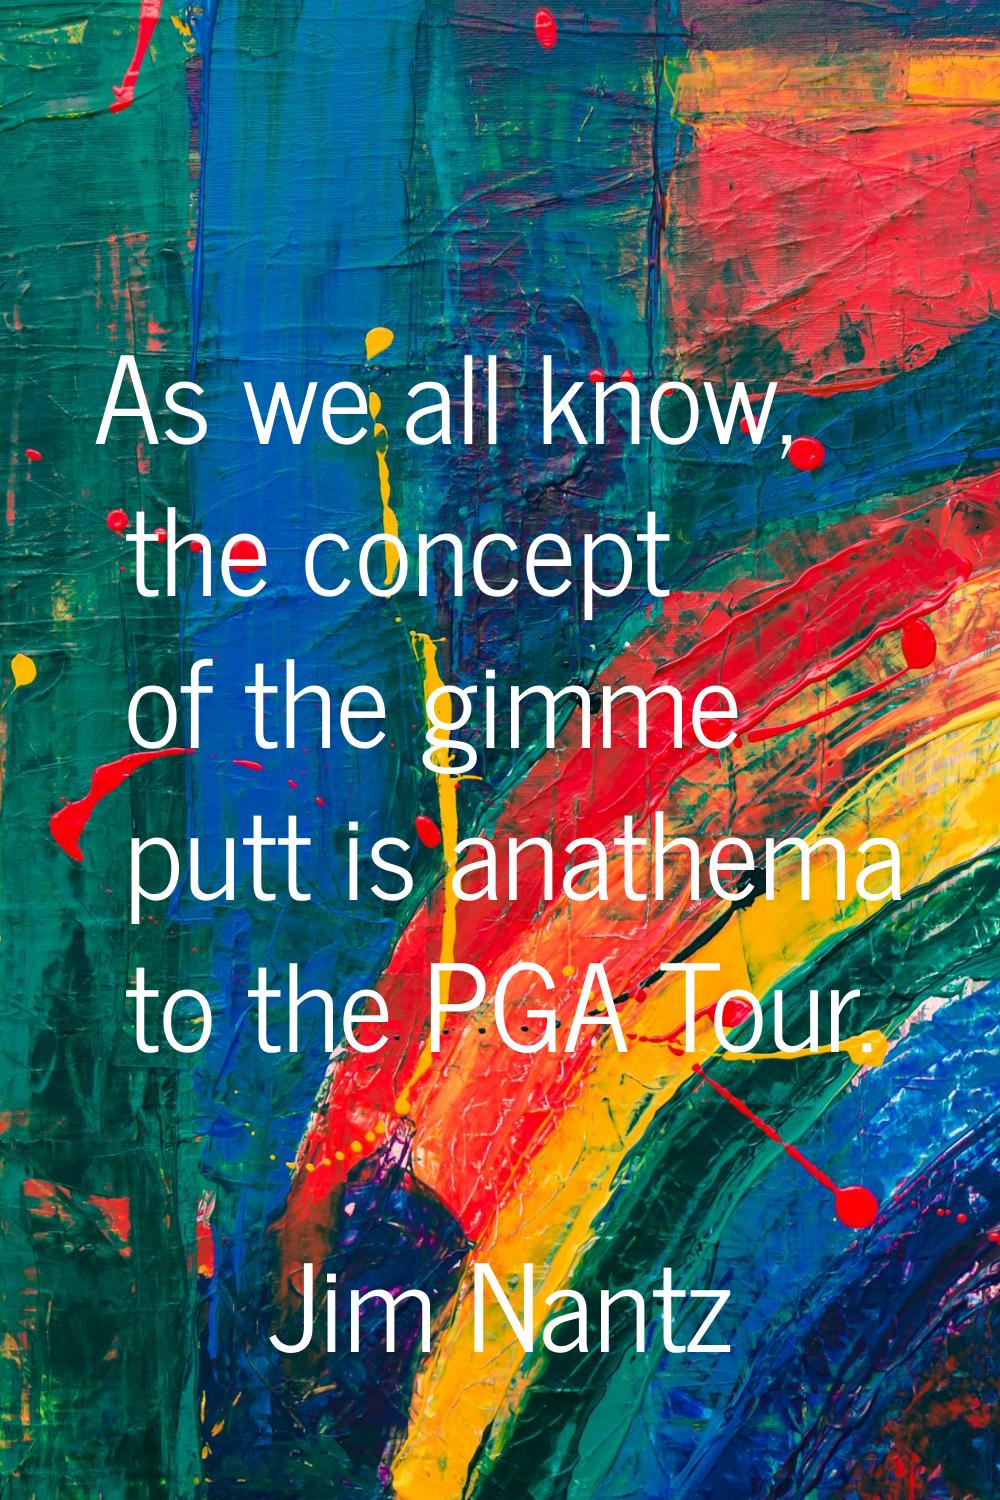 As we all know, the concept of the gimme putt is anathema to the PGA Tour.